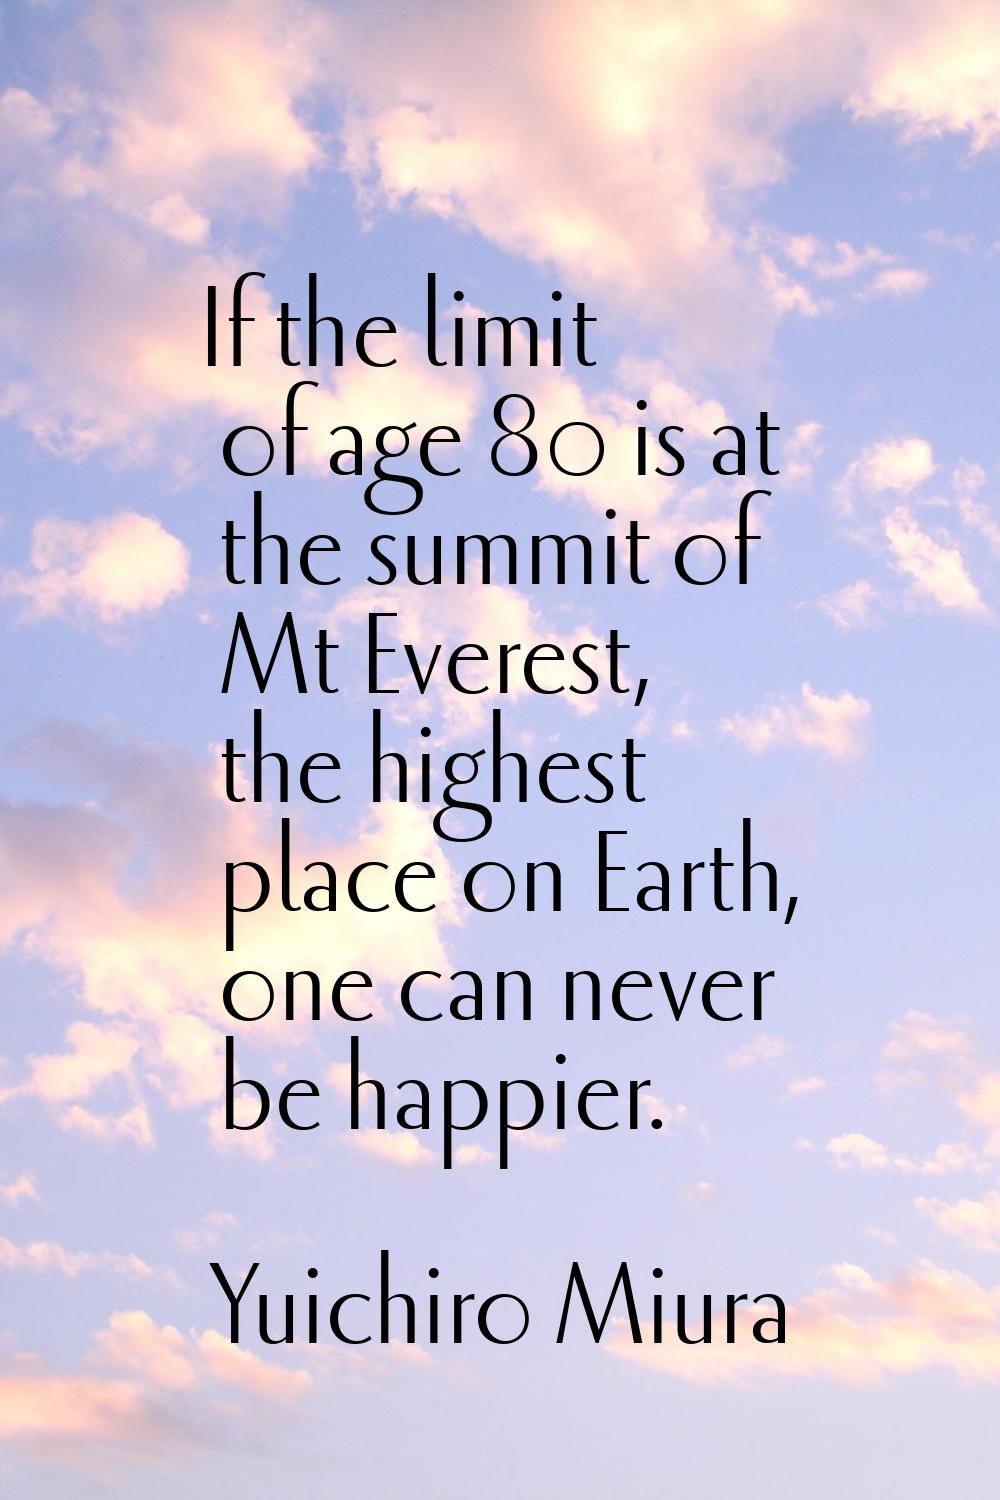 If the limit of age 80 is at the summit of Mt Everest, the highest place on Earth, one can never be